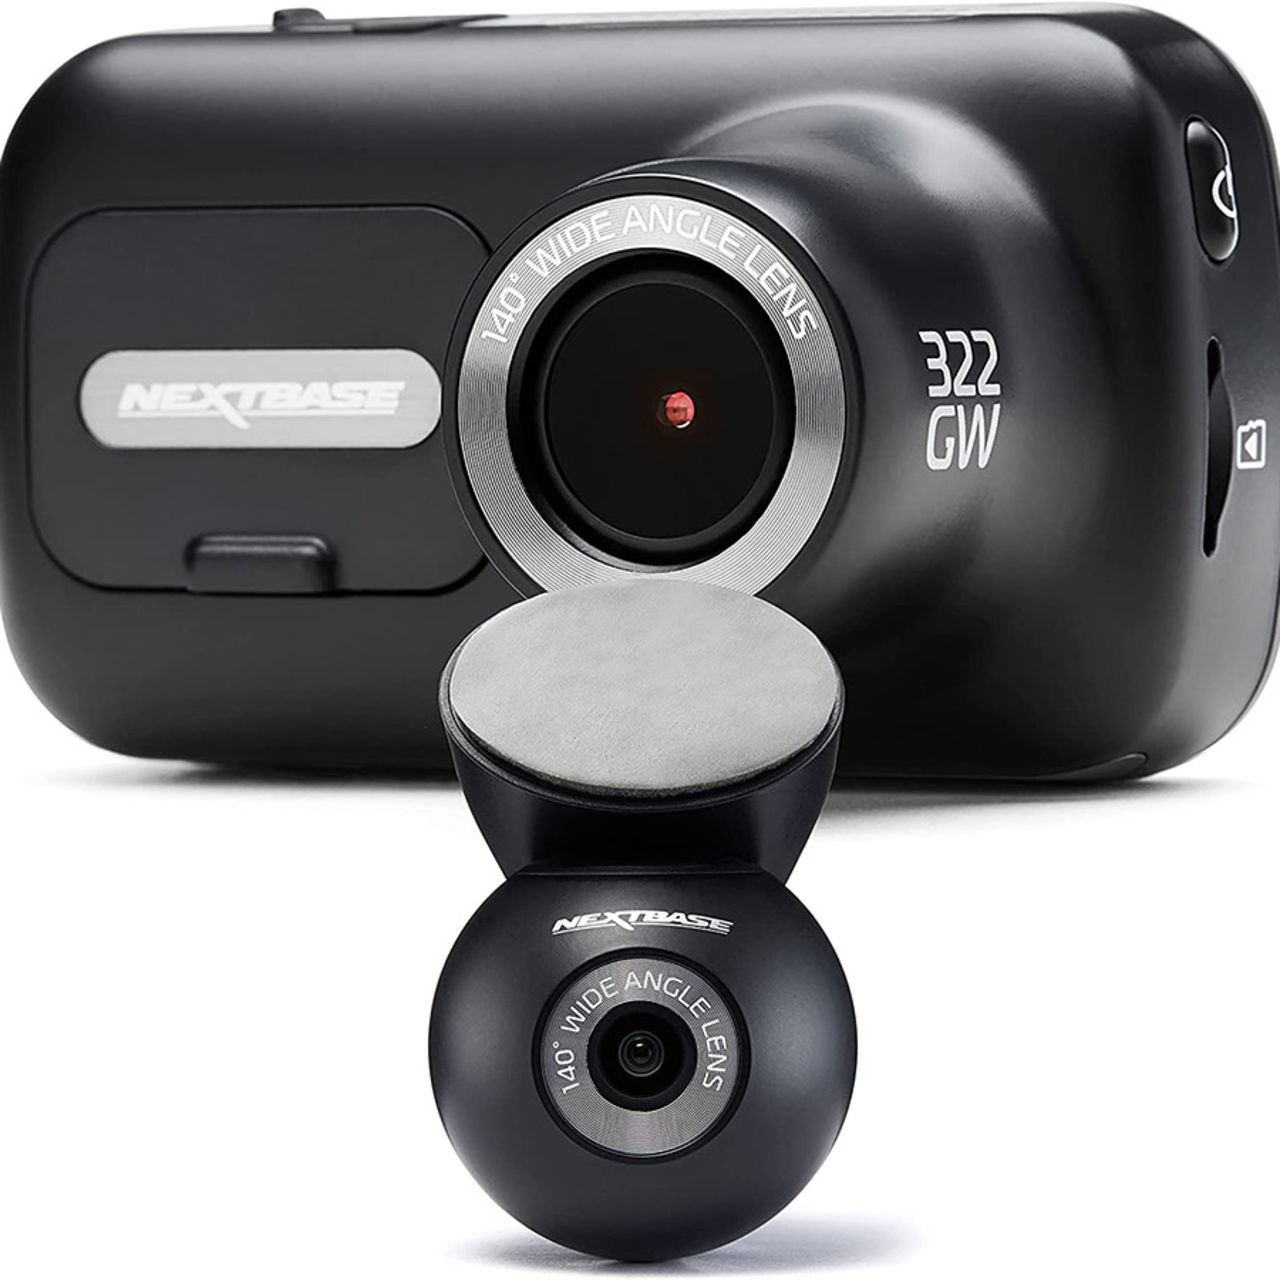 Ring Car Cam review: A smart dash cam that checks all the boxes